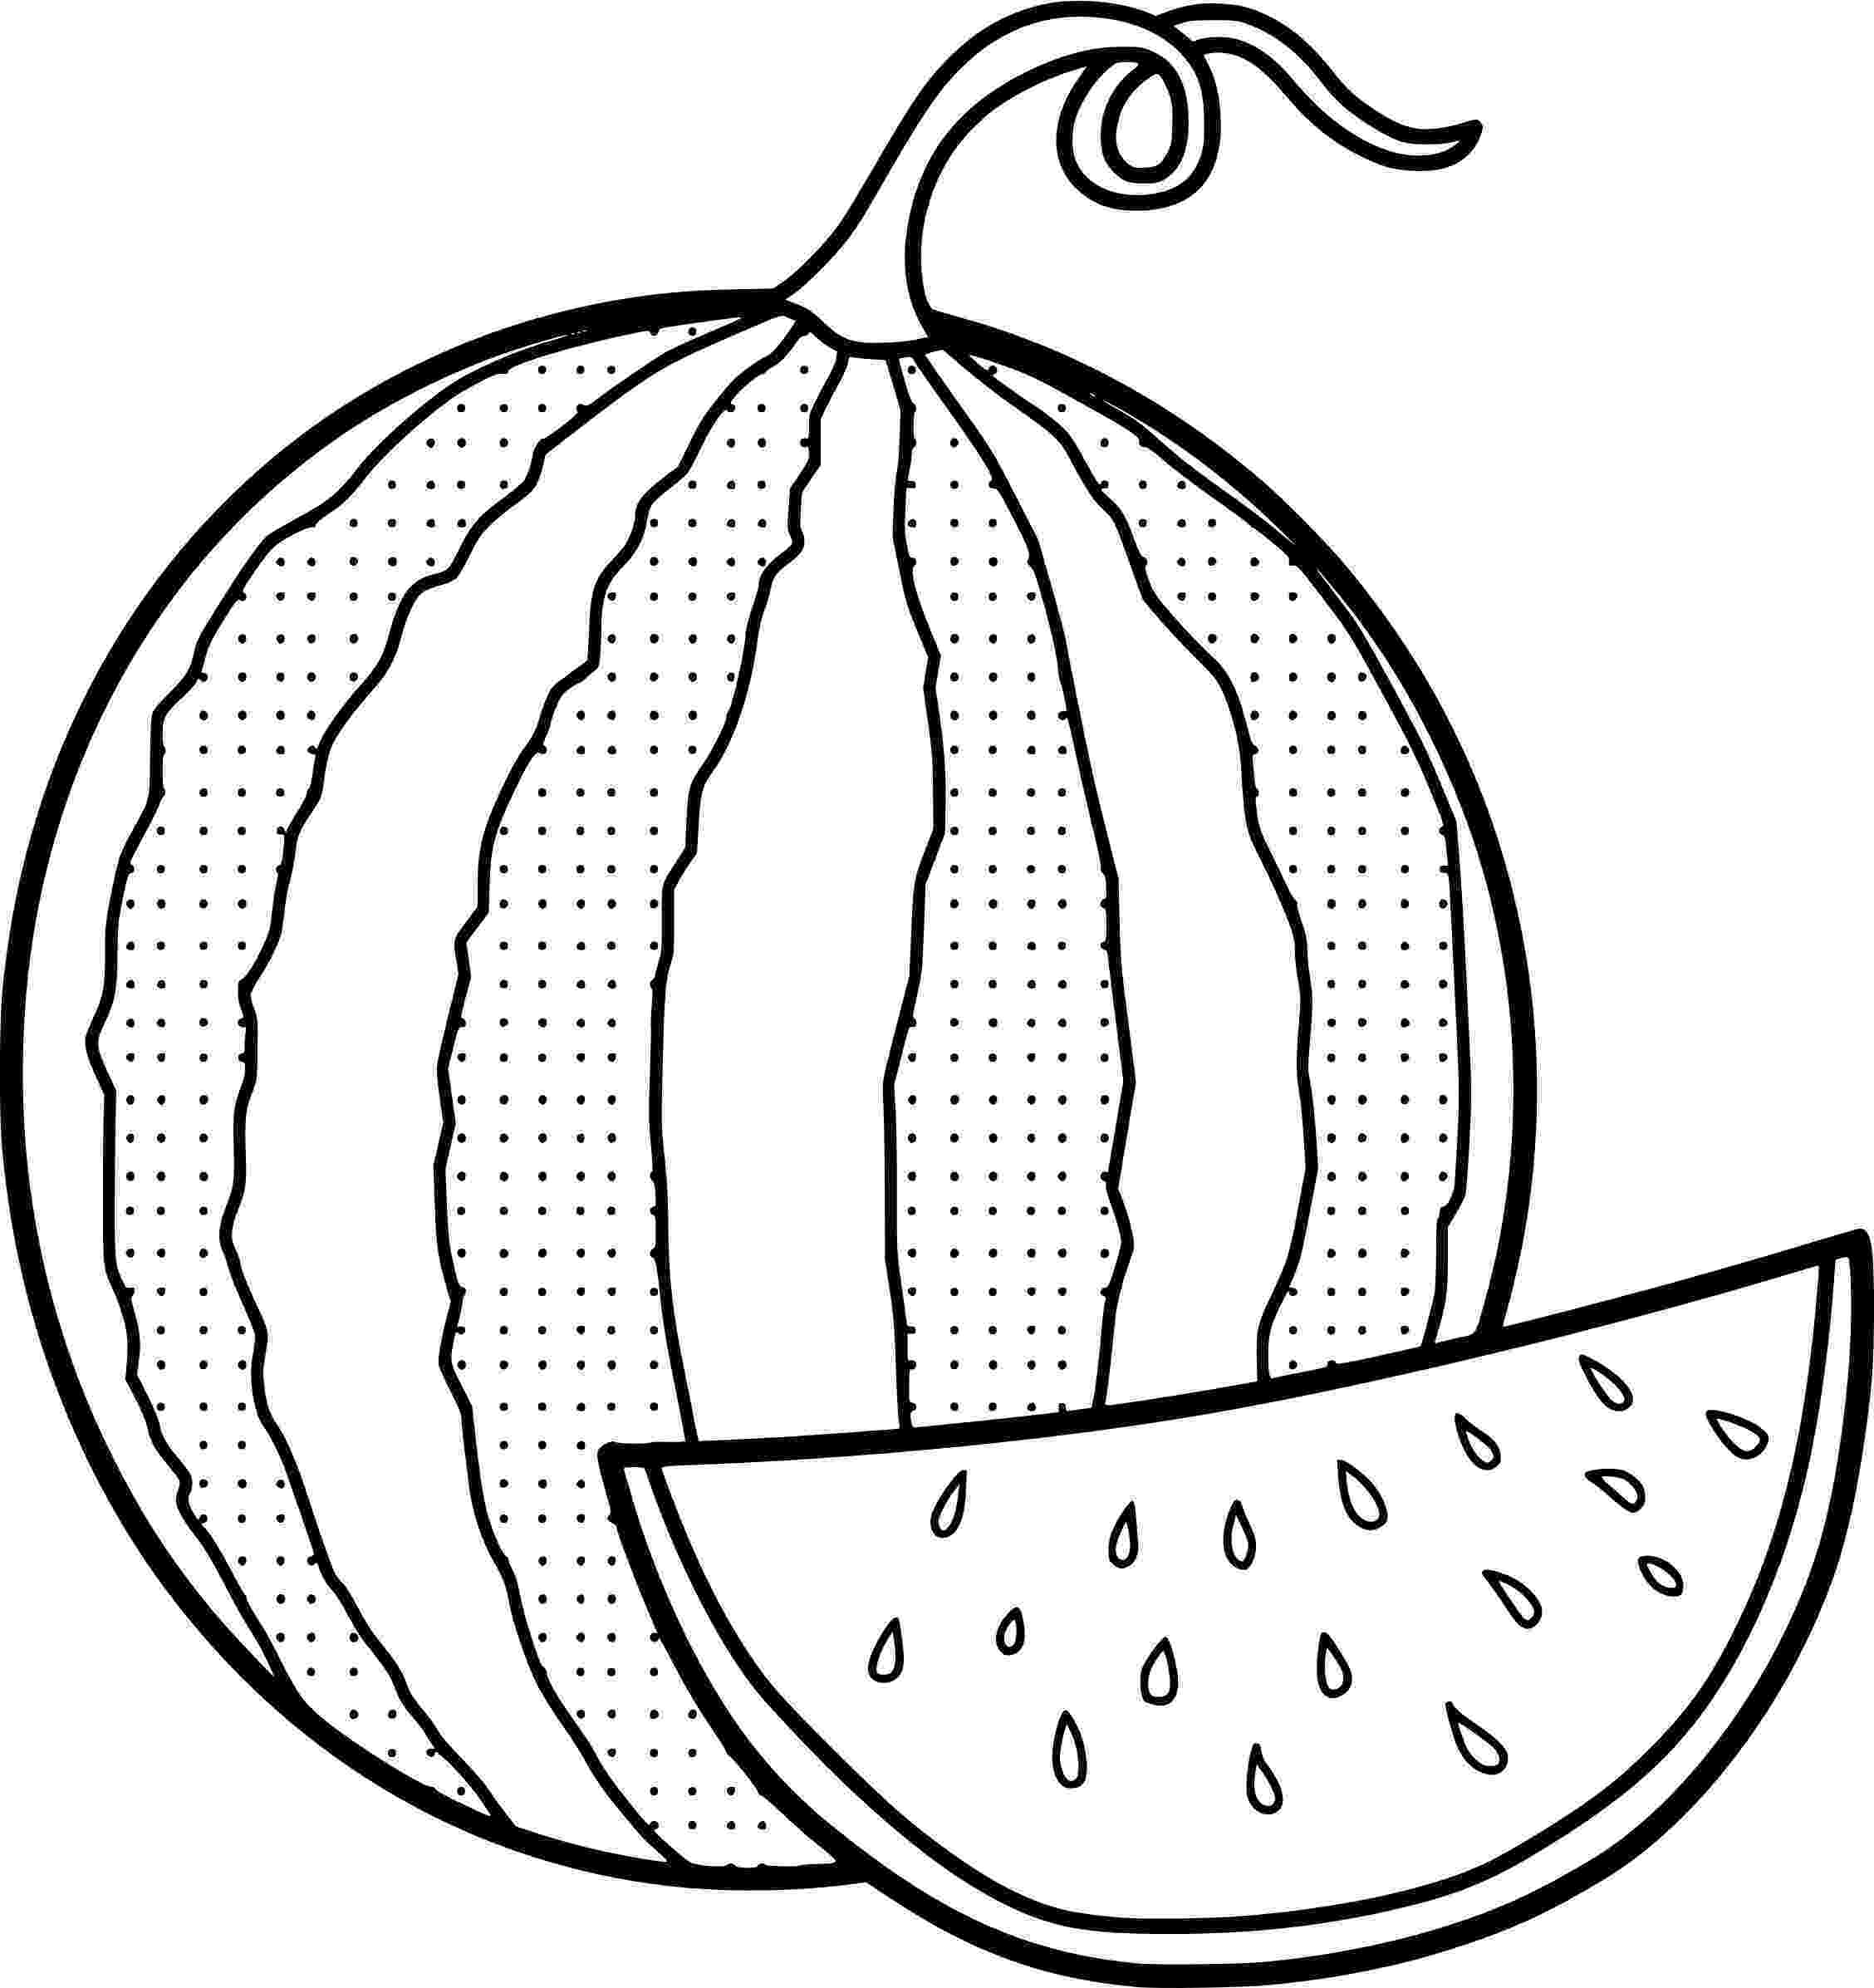 watermelon coloring pages watermelon coloring pages best coloring pages for kids coloring watermelon pages 